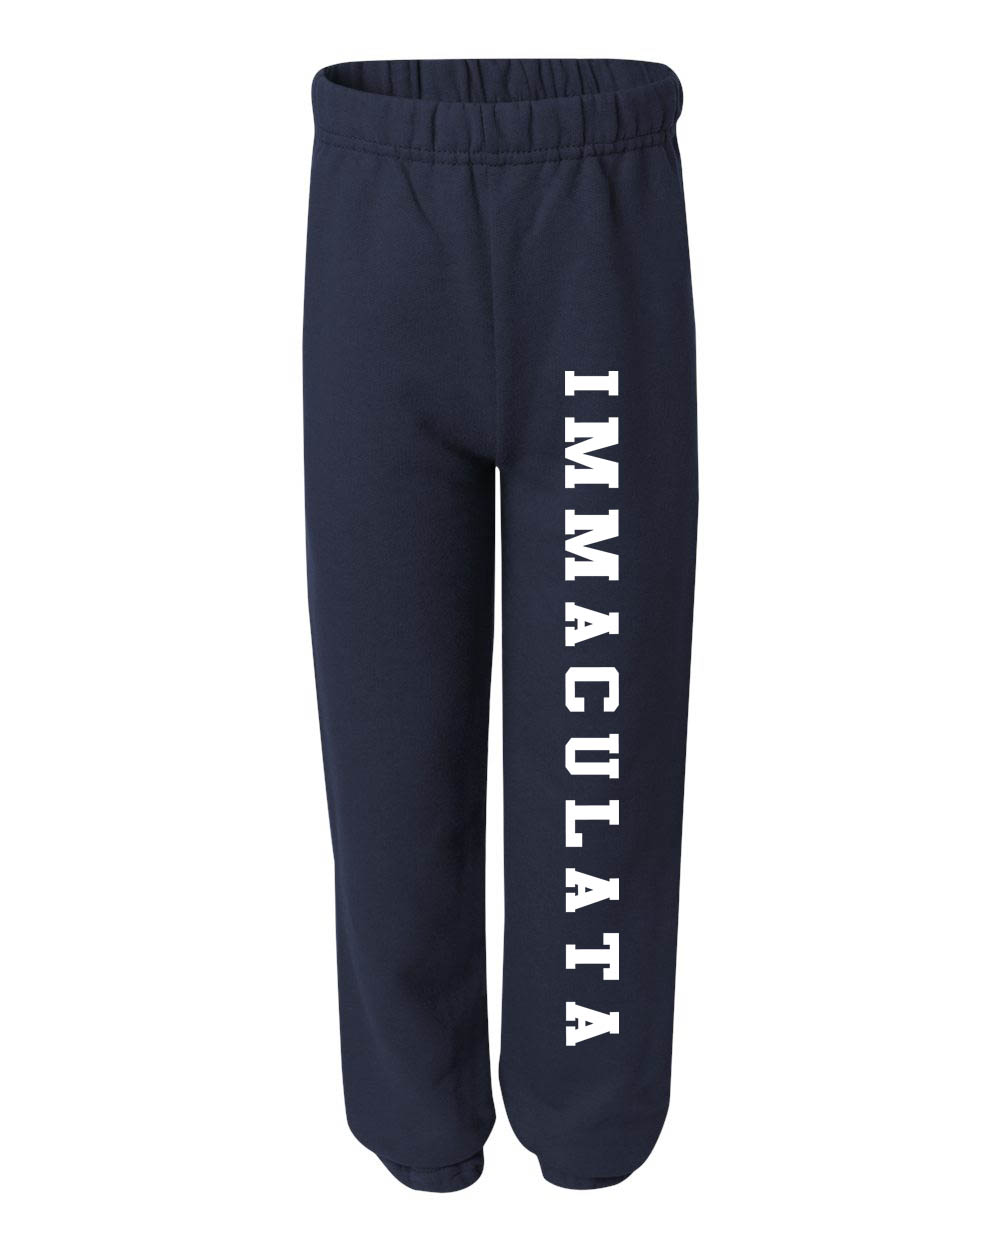 24 Navy Spartan Sweatpants with pockets